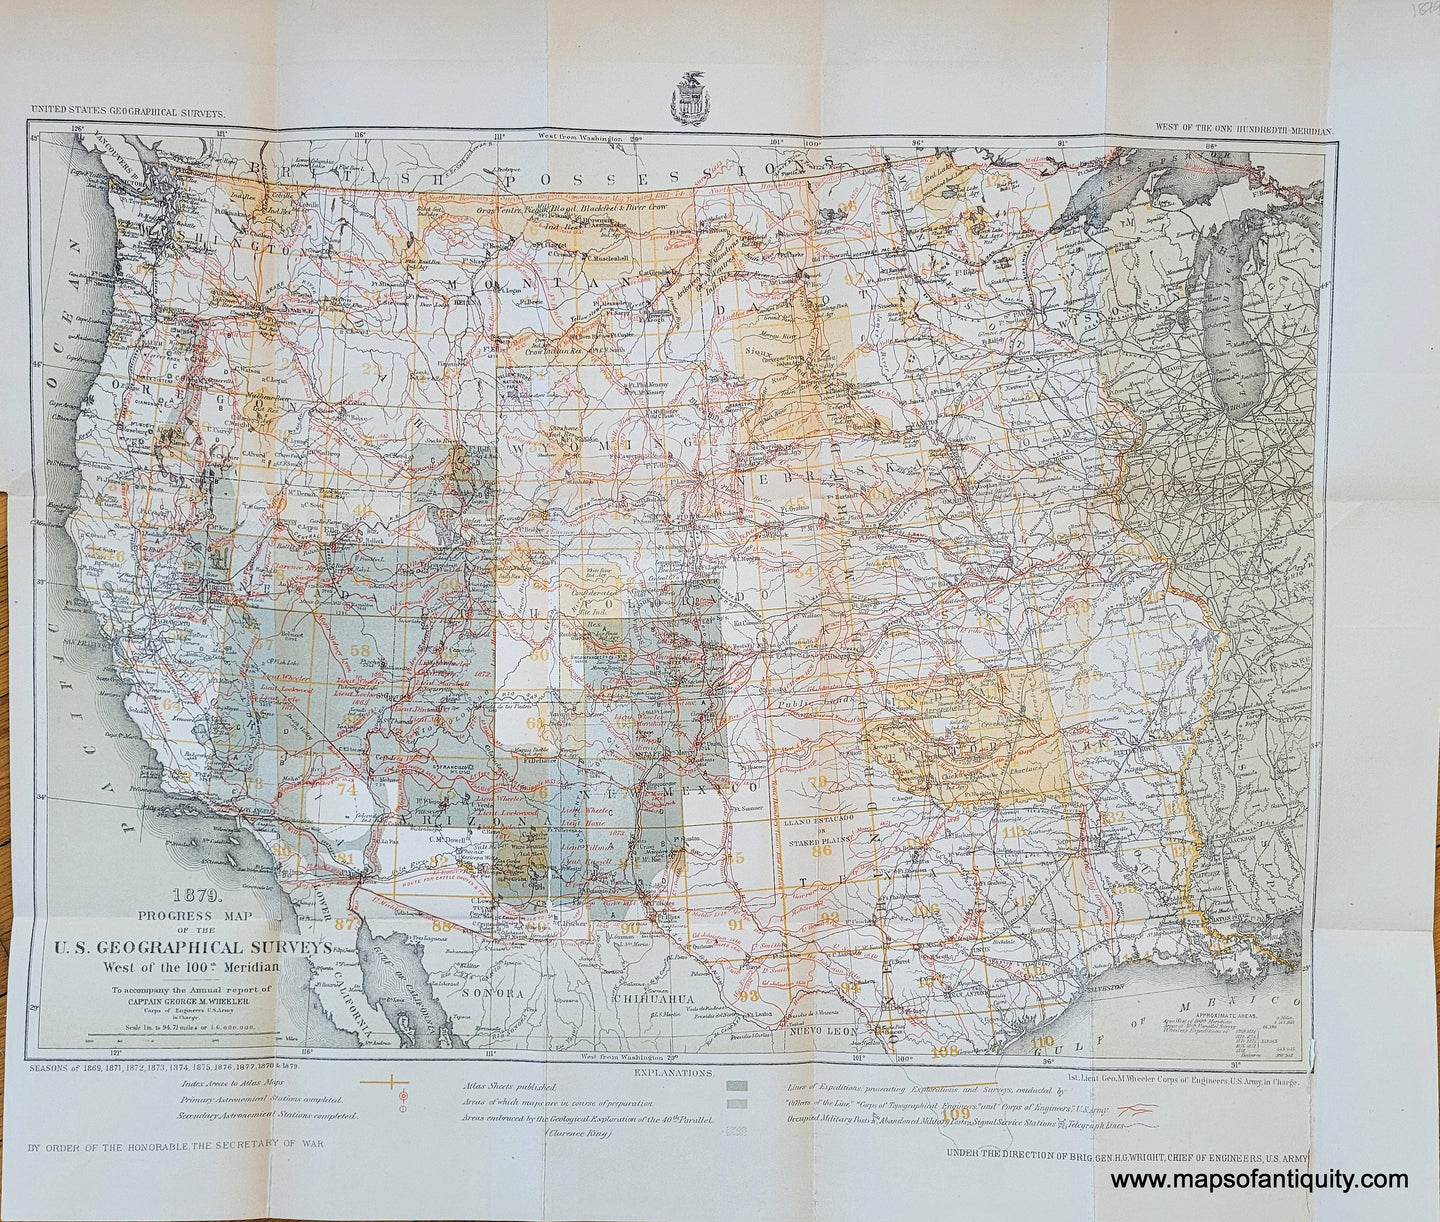 Genuine-Antique-Map-Progress-Map-of-the-US-Geographical-Surveys-West-of-the-100th-Meridian-1879-Wheeler-Maps-Of-Antiquity